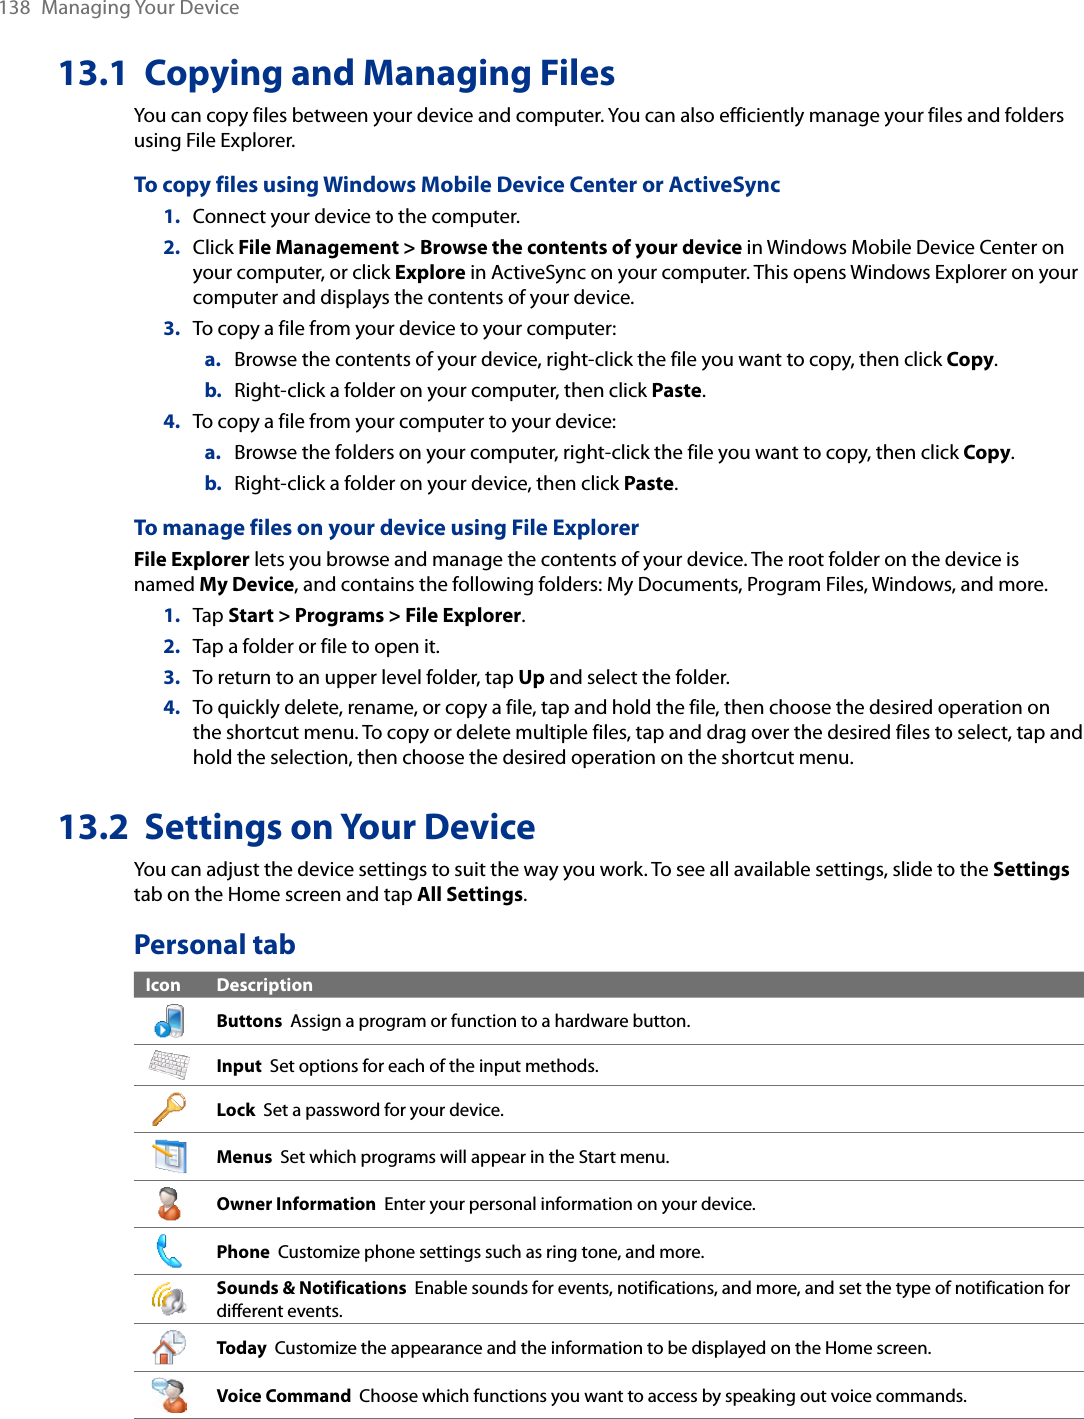 138  Managing Your Device13.1  Copying and Managing FilesYou can copy files between your device and computer. You can also efficiently manage your files and folders using File Explorer.To copy files using Windows Mobile Device Center or ActiveSync1.  Connect your device to the computer.2.  Click File Management &gt; Browse the contents of your device in Windows Mobile Device Center on your computer, or click Explore in ActiveSync on your computer. This opens Windows Explorer on your computer and displays the contents of your device.3.  To copy a file from your device to your computer:a.  Browse the contents of your device, right-click the file you want to copy, then click Copy.b.  Right-click a folder on your computer, then click Paste.4.  To copy a file from your computer to your device:a.  Browse the folders on your computer, right-click the file you want to copy, then click Copy.b.  Right-click a folder on your device, then click Paste.To manage files on your device using File ExplorerFile Explorer lets you browse and manage the contents of your device. The root folder on the device is named My Device, and contains the following folders: My Documents, Program Files, Windows, and more.1.  Tap Start &gt; Programs &gt; File Explorer.2.  Tap a folder or file to open it.3.  To return to an upper level folder, tap Up and select the folder.4.  To quickly delete, rename, or copy a file, tap and hold the file, then choose the desired operation on the shortcut menu. To copy or delete multiple files, tap and drag over the desired files to select, tap and hold the selection, then choose the desired operation on the shortcut menu.13.2  Settings on Your DeviceYou can adjust the device settings to suit the way you work. To see all available settings, slide to the Settings tab on the Home screen and tap All Settings.Personal tabIcon DescriptionButtons  Assign a program or function to a hardware button.Input  Set options for each of the input methods.Lock  Set a password for your device.Menus  Set which programs will appear in the Start menu.Owner Information  Enter your personal information on your device.Phone  Customize phone settings such as ring tone, and more.Sounds &amp; Notifications  Enable sounds for events, notifications, and more, and set the type of notification for different events.Today  Customize the appearance and the information to be displayed on the Home screen.Voice Command  Choose which functions you want to access by speaking out voice commands.